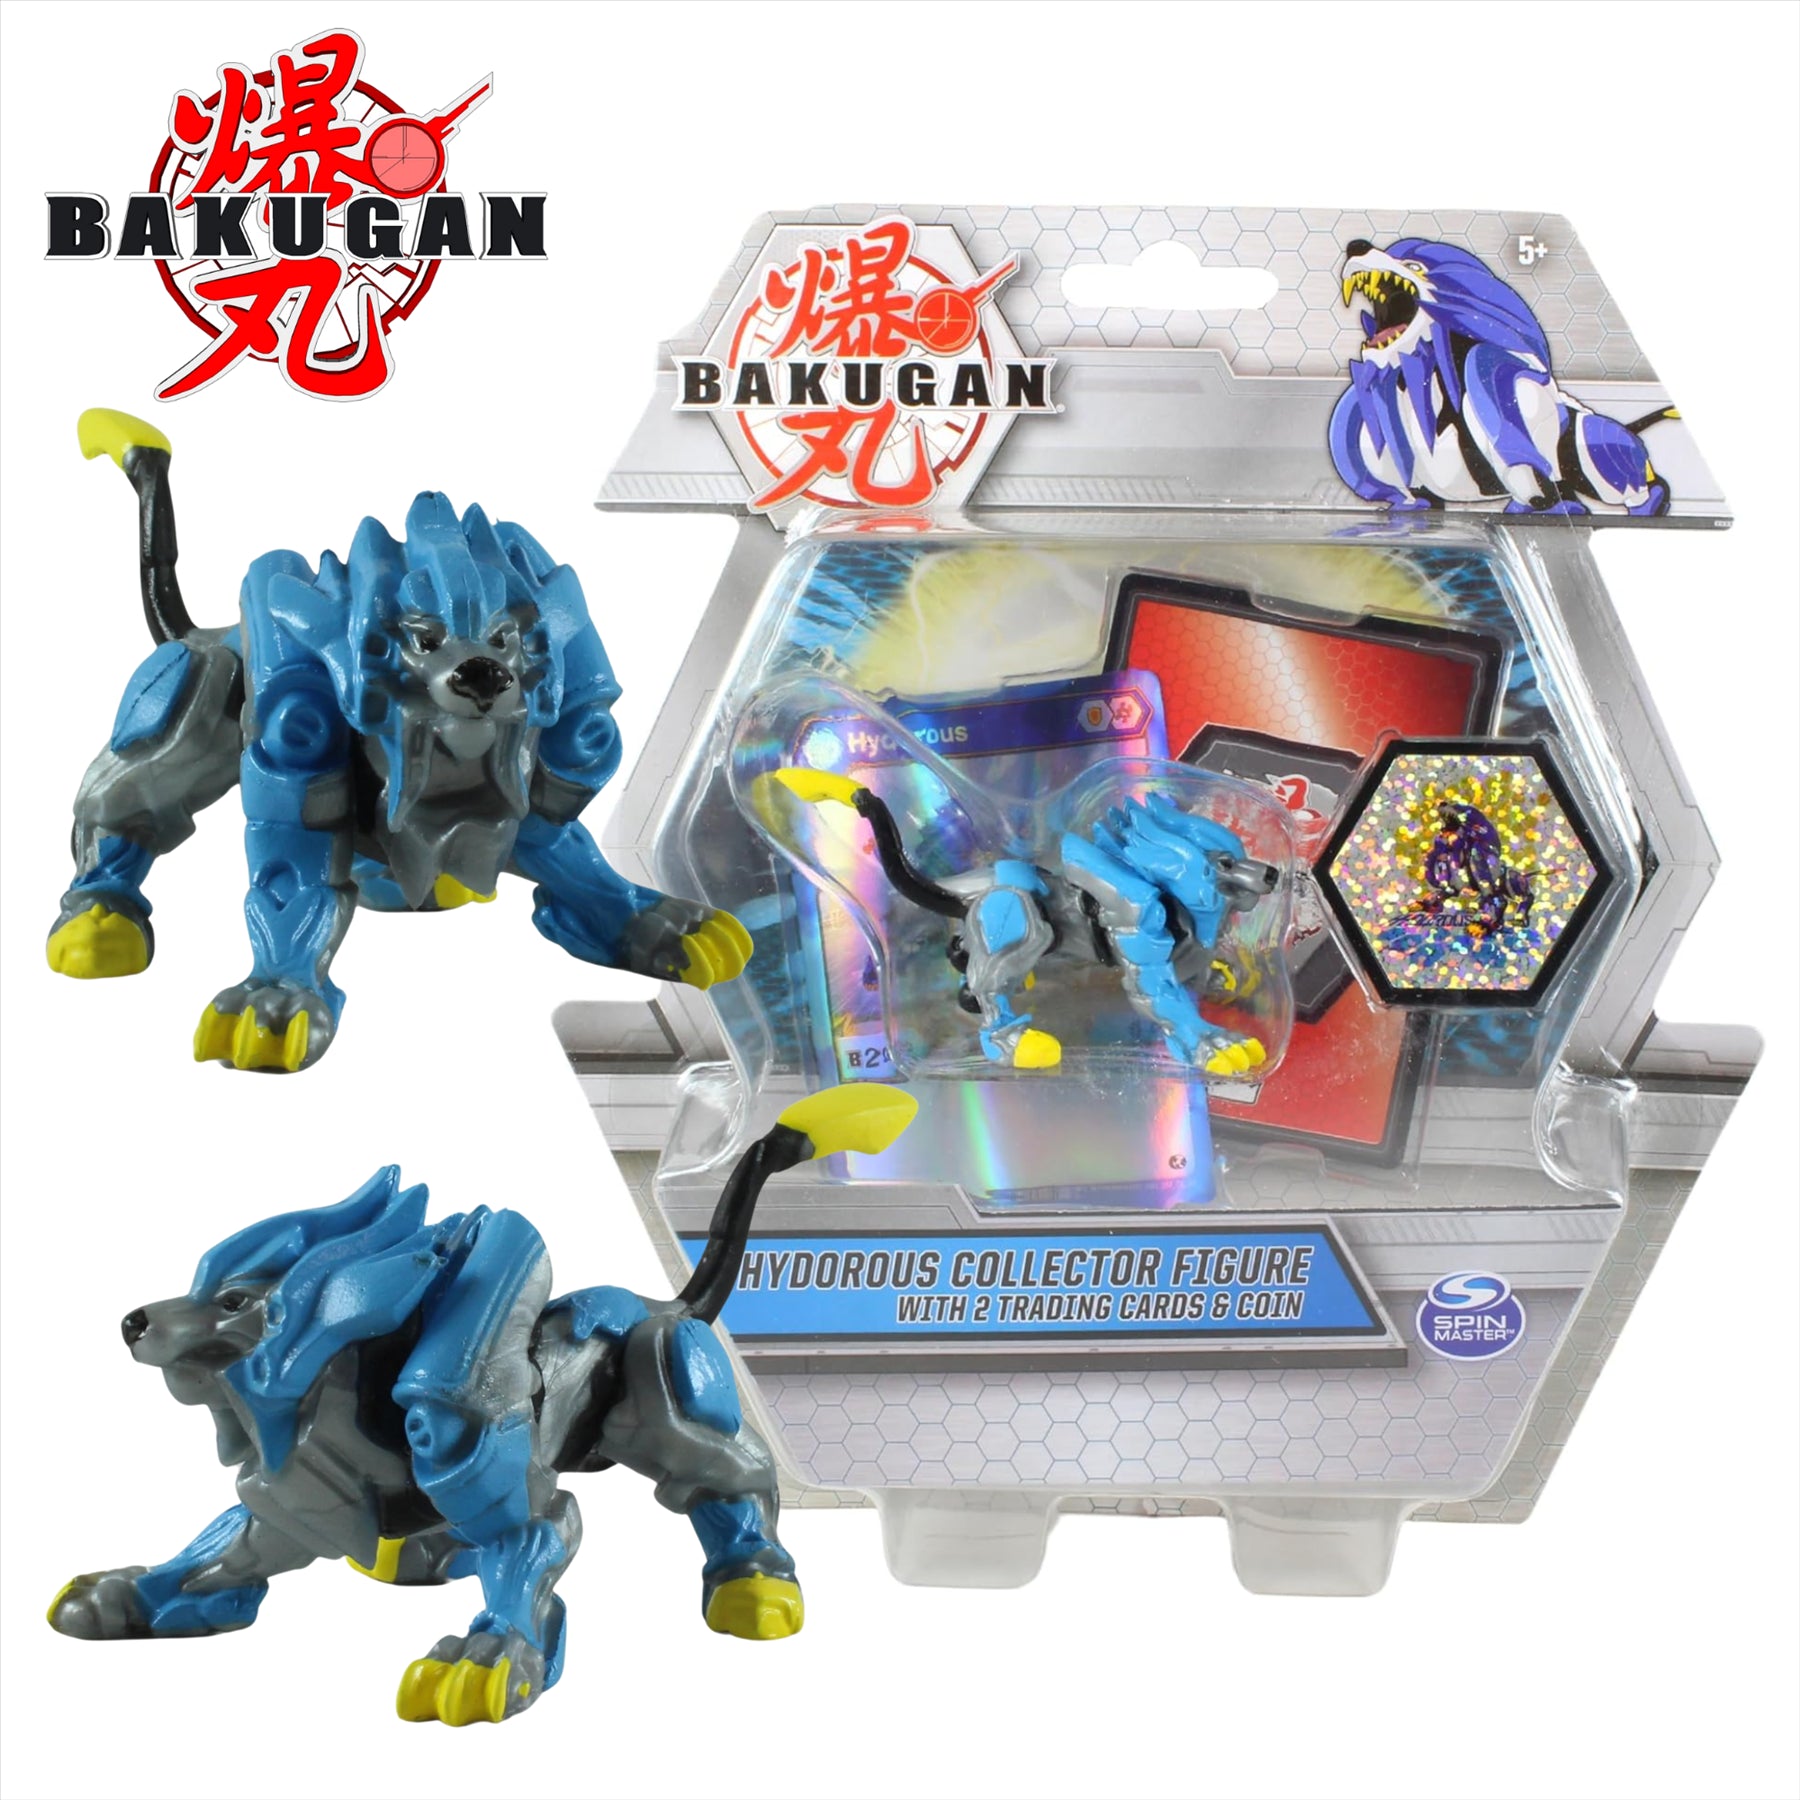 BAKUGAN Collector Figures With 2 Trading Cards & Collectors Coin - Hydorous Dark Blue - Toptoys2u